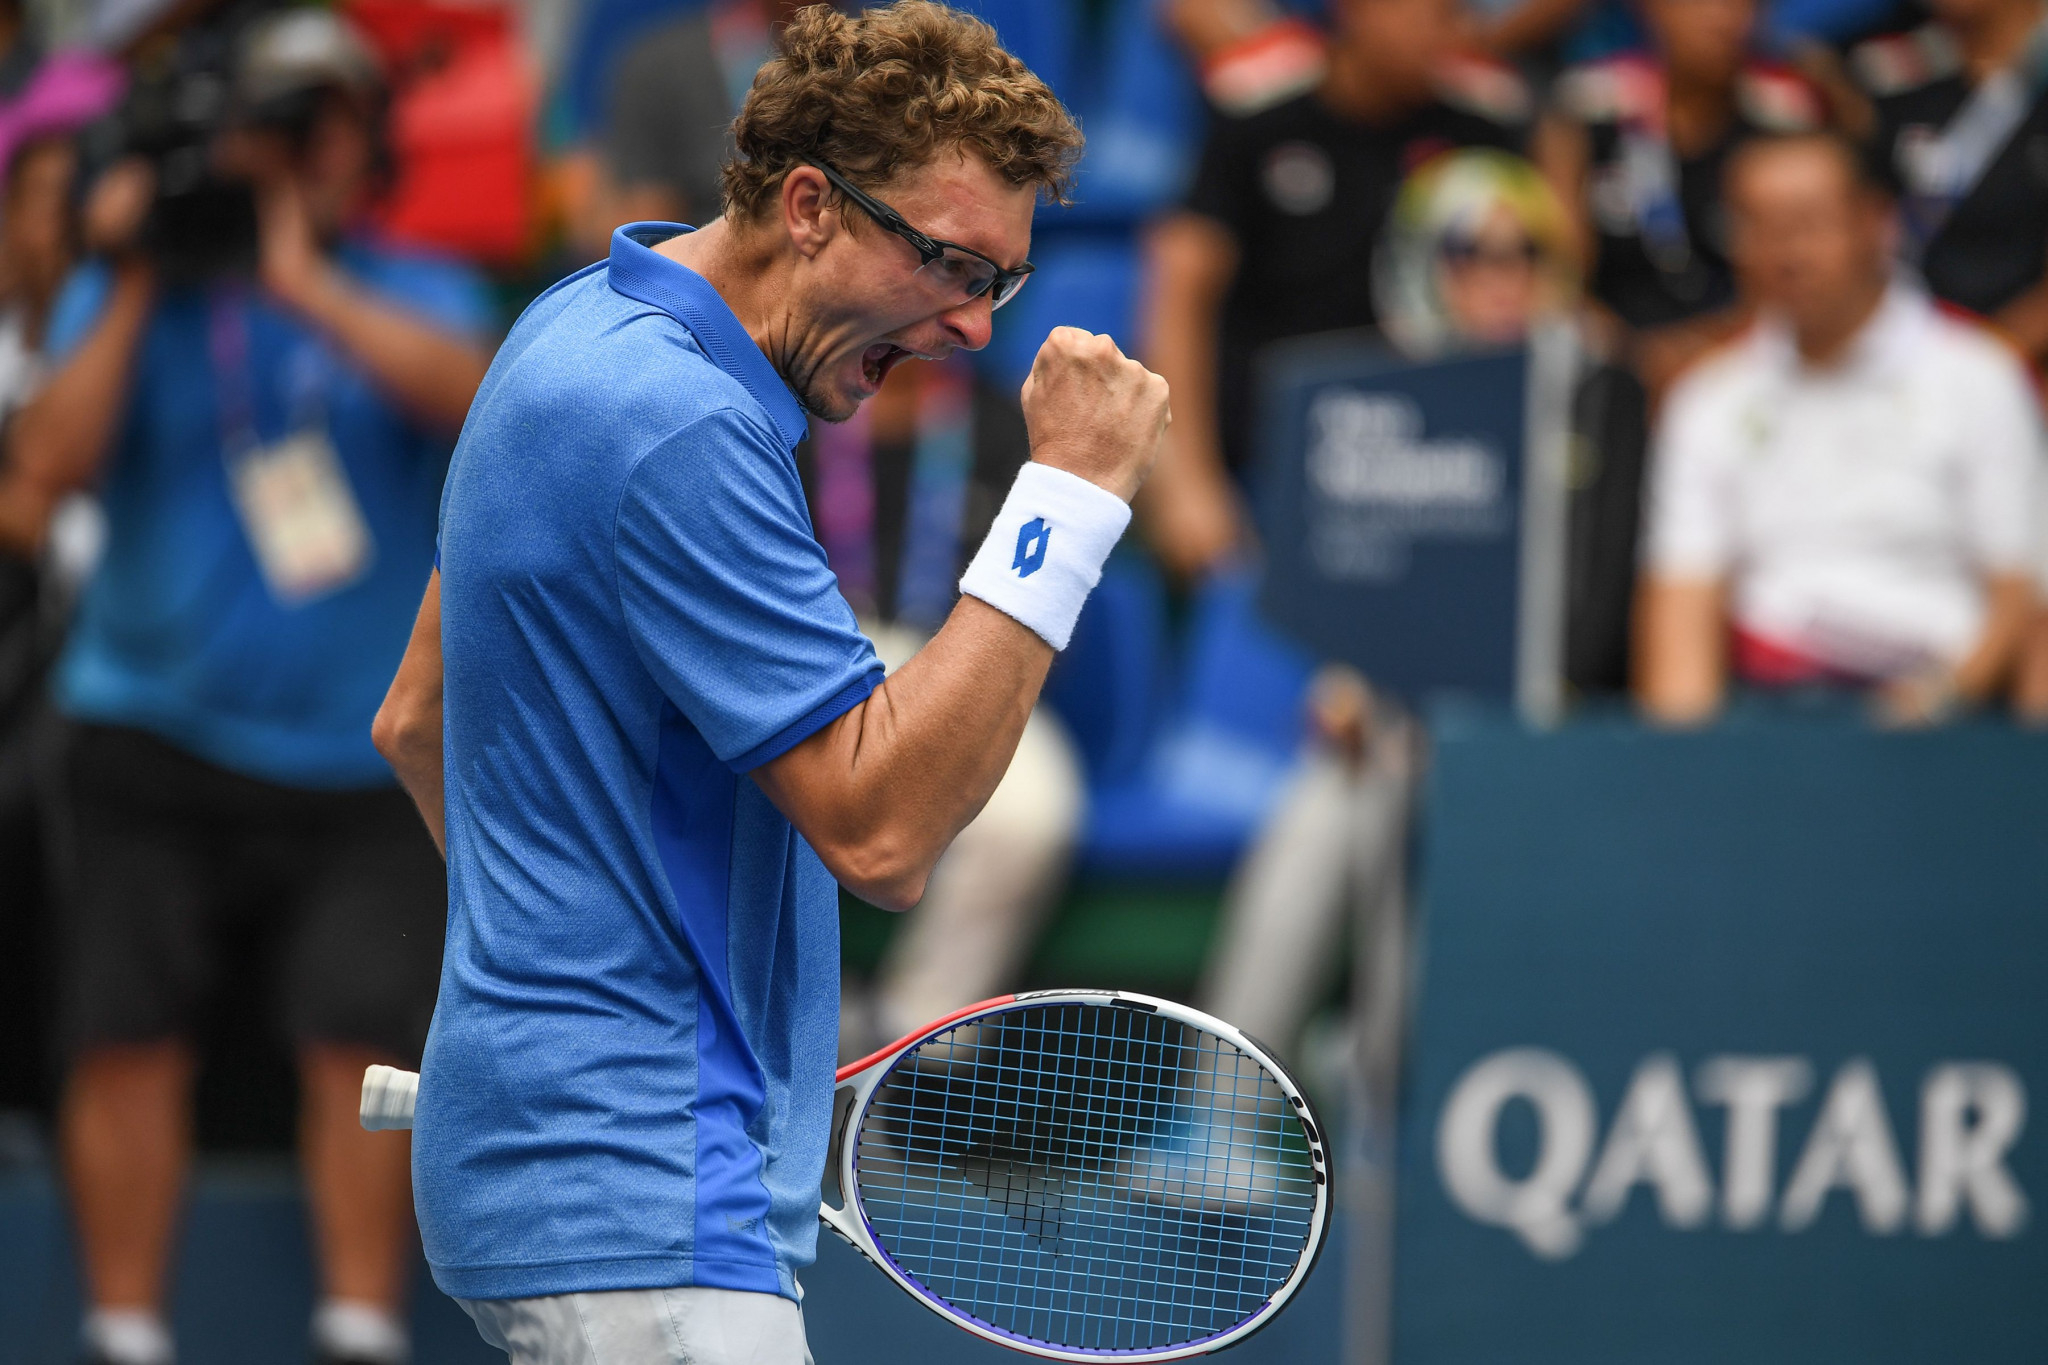 Denis Istomin, the world number 75, won the men's singles tennis title for Uzbekistan and then immediately flew to New York for the US Open  ©Getty Images